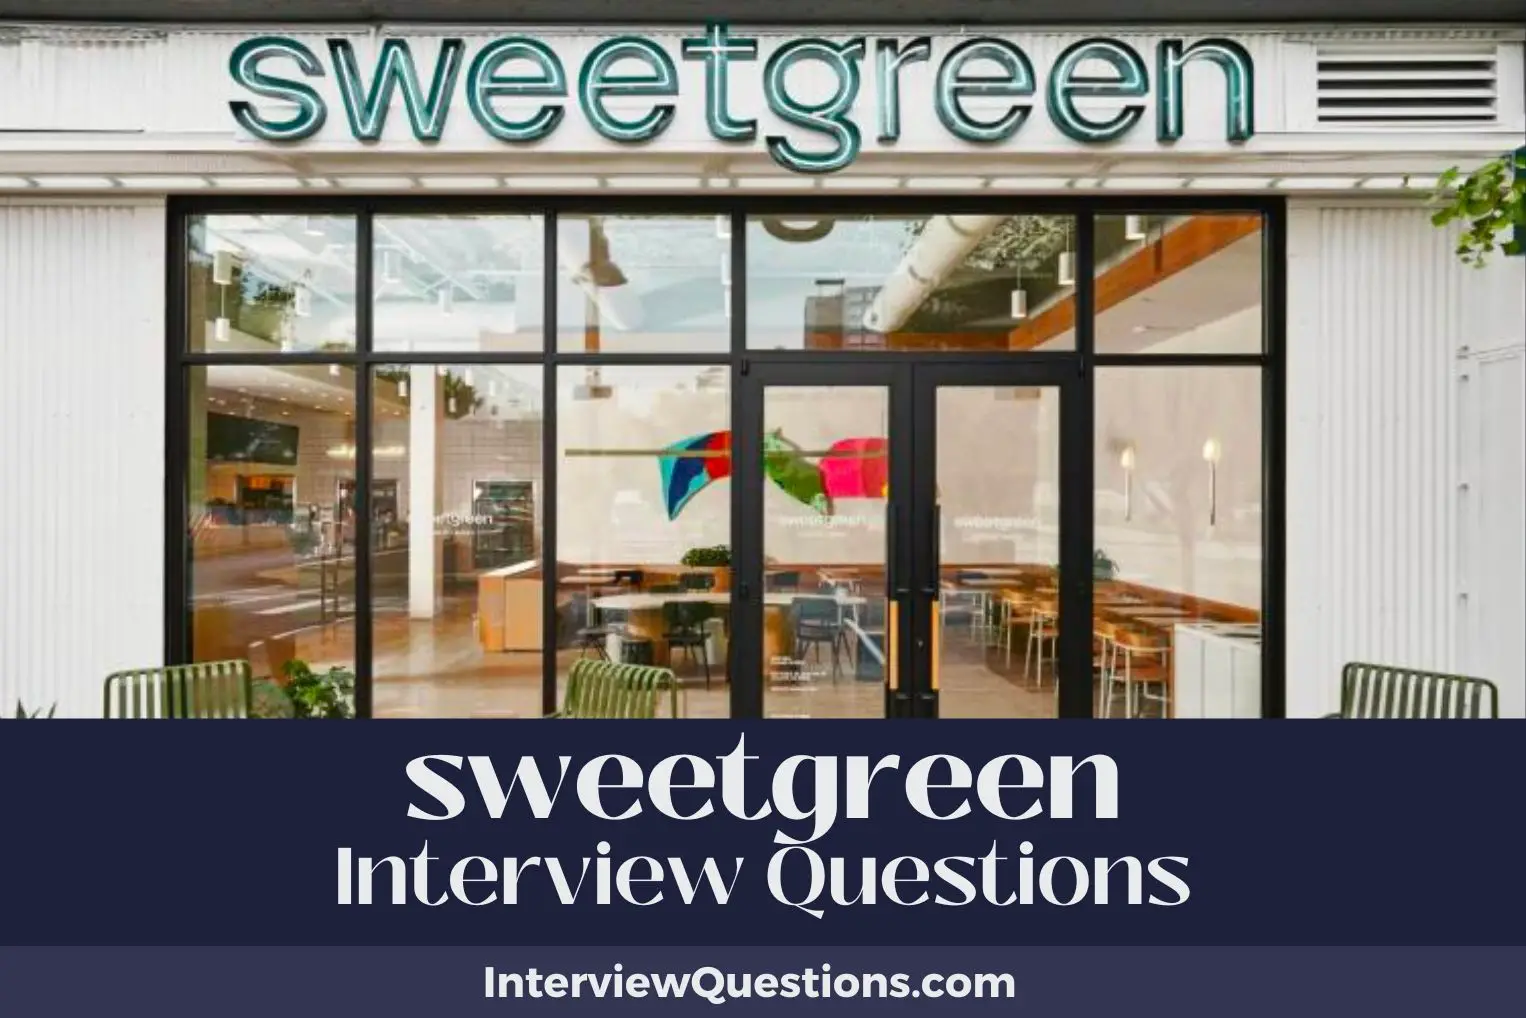 sweetgreen Interview Questions